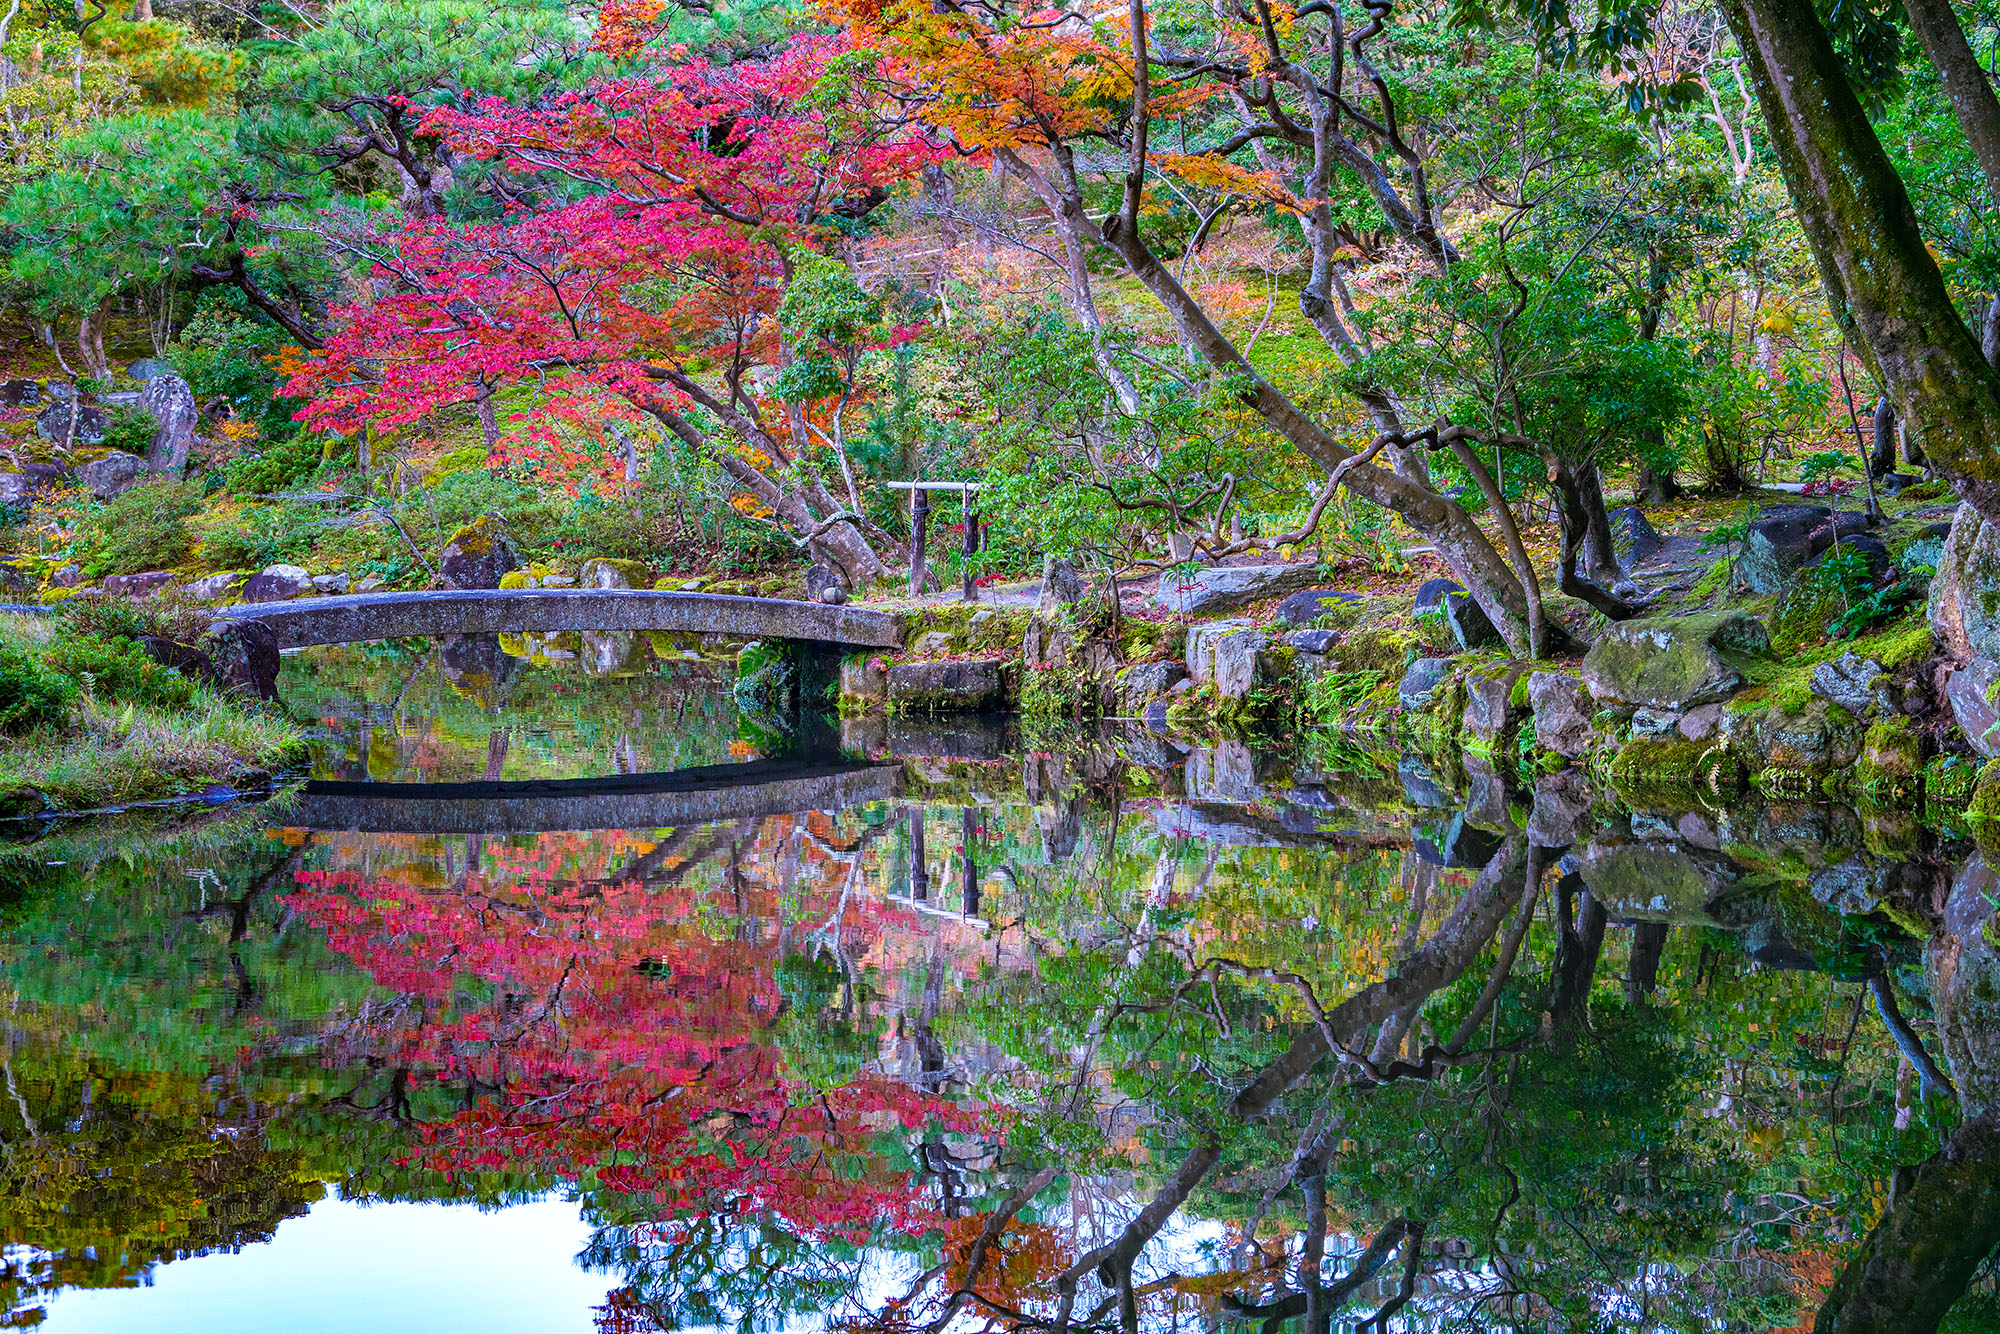 In the serene embrace of a Japanese garden near Nara, Japan, this image captures the essence of autumn's splendor. A picturesque...